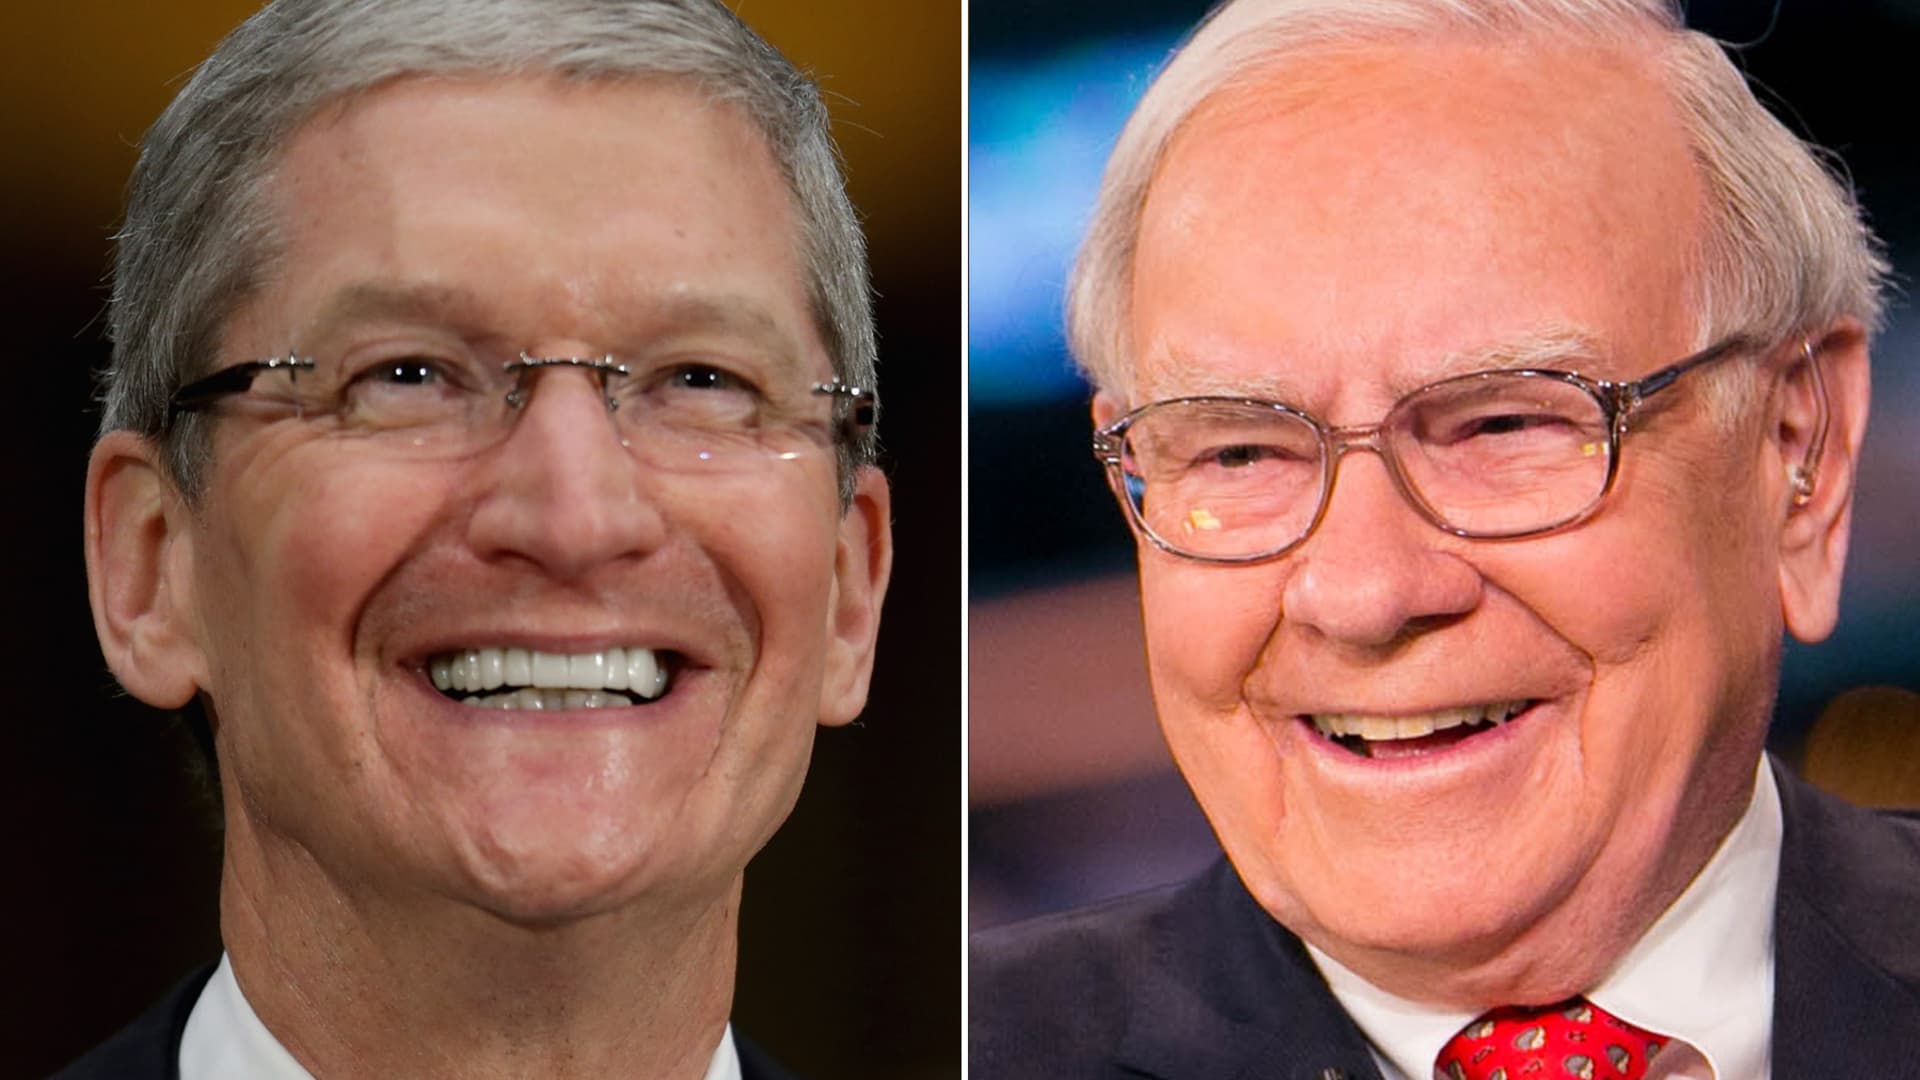 Apple is Buffett’s biggest stock, but his moat thesis faces questions